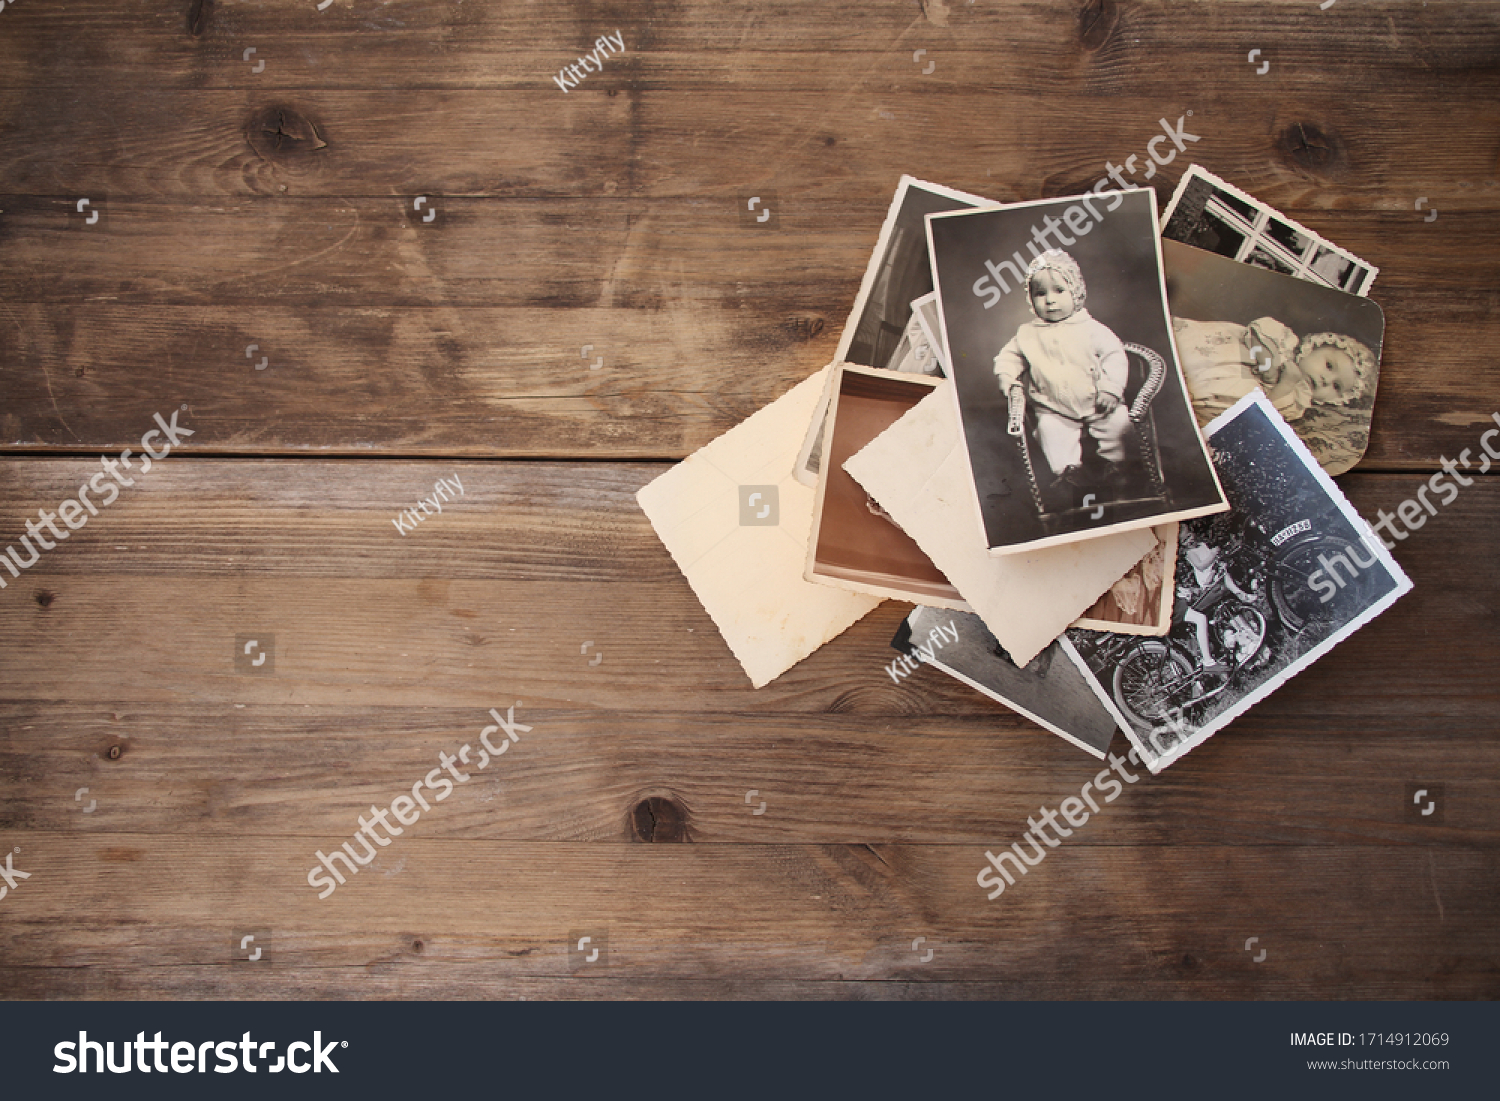 old vintage monochrome photographs, pictures taken in 1968, in sepia color are scattered on a wooden table, concept of genealogy, the memory of ancestors, family ties, memories of childhood #1714912069